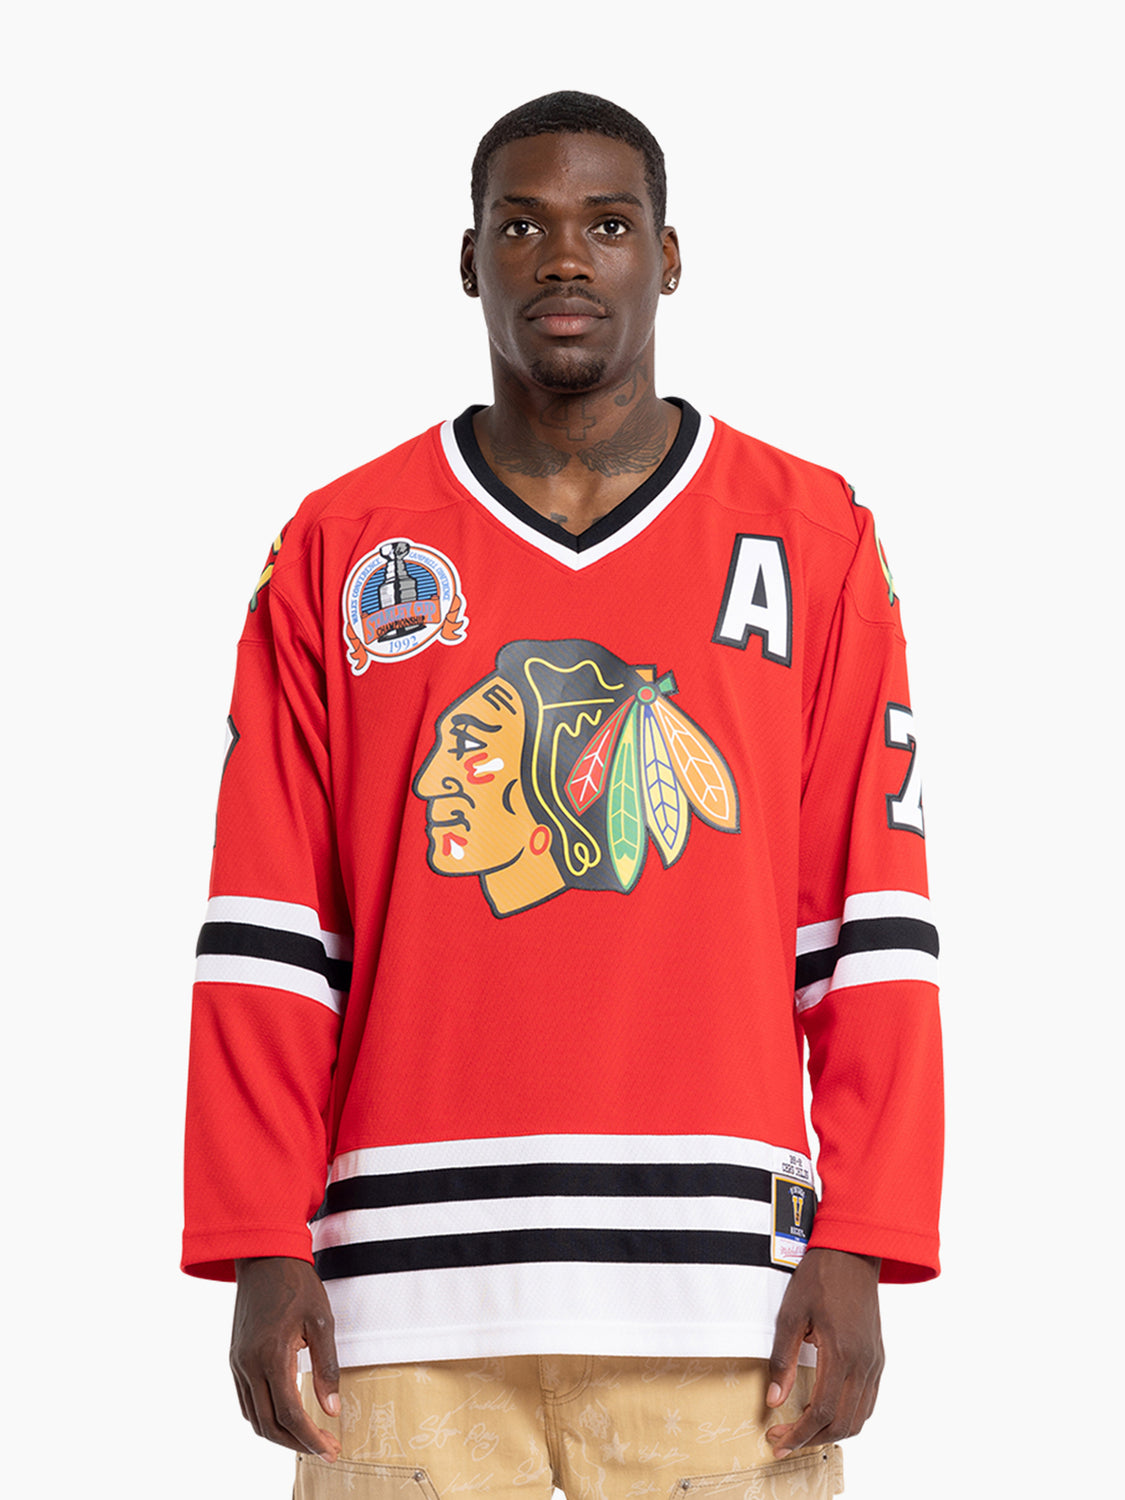 Mitchell & Ness Launches NHL Blue Line Jerseys Featuring